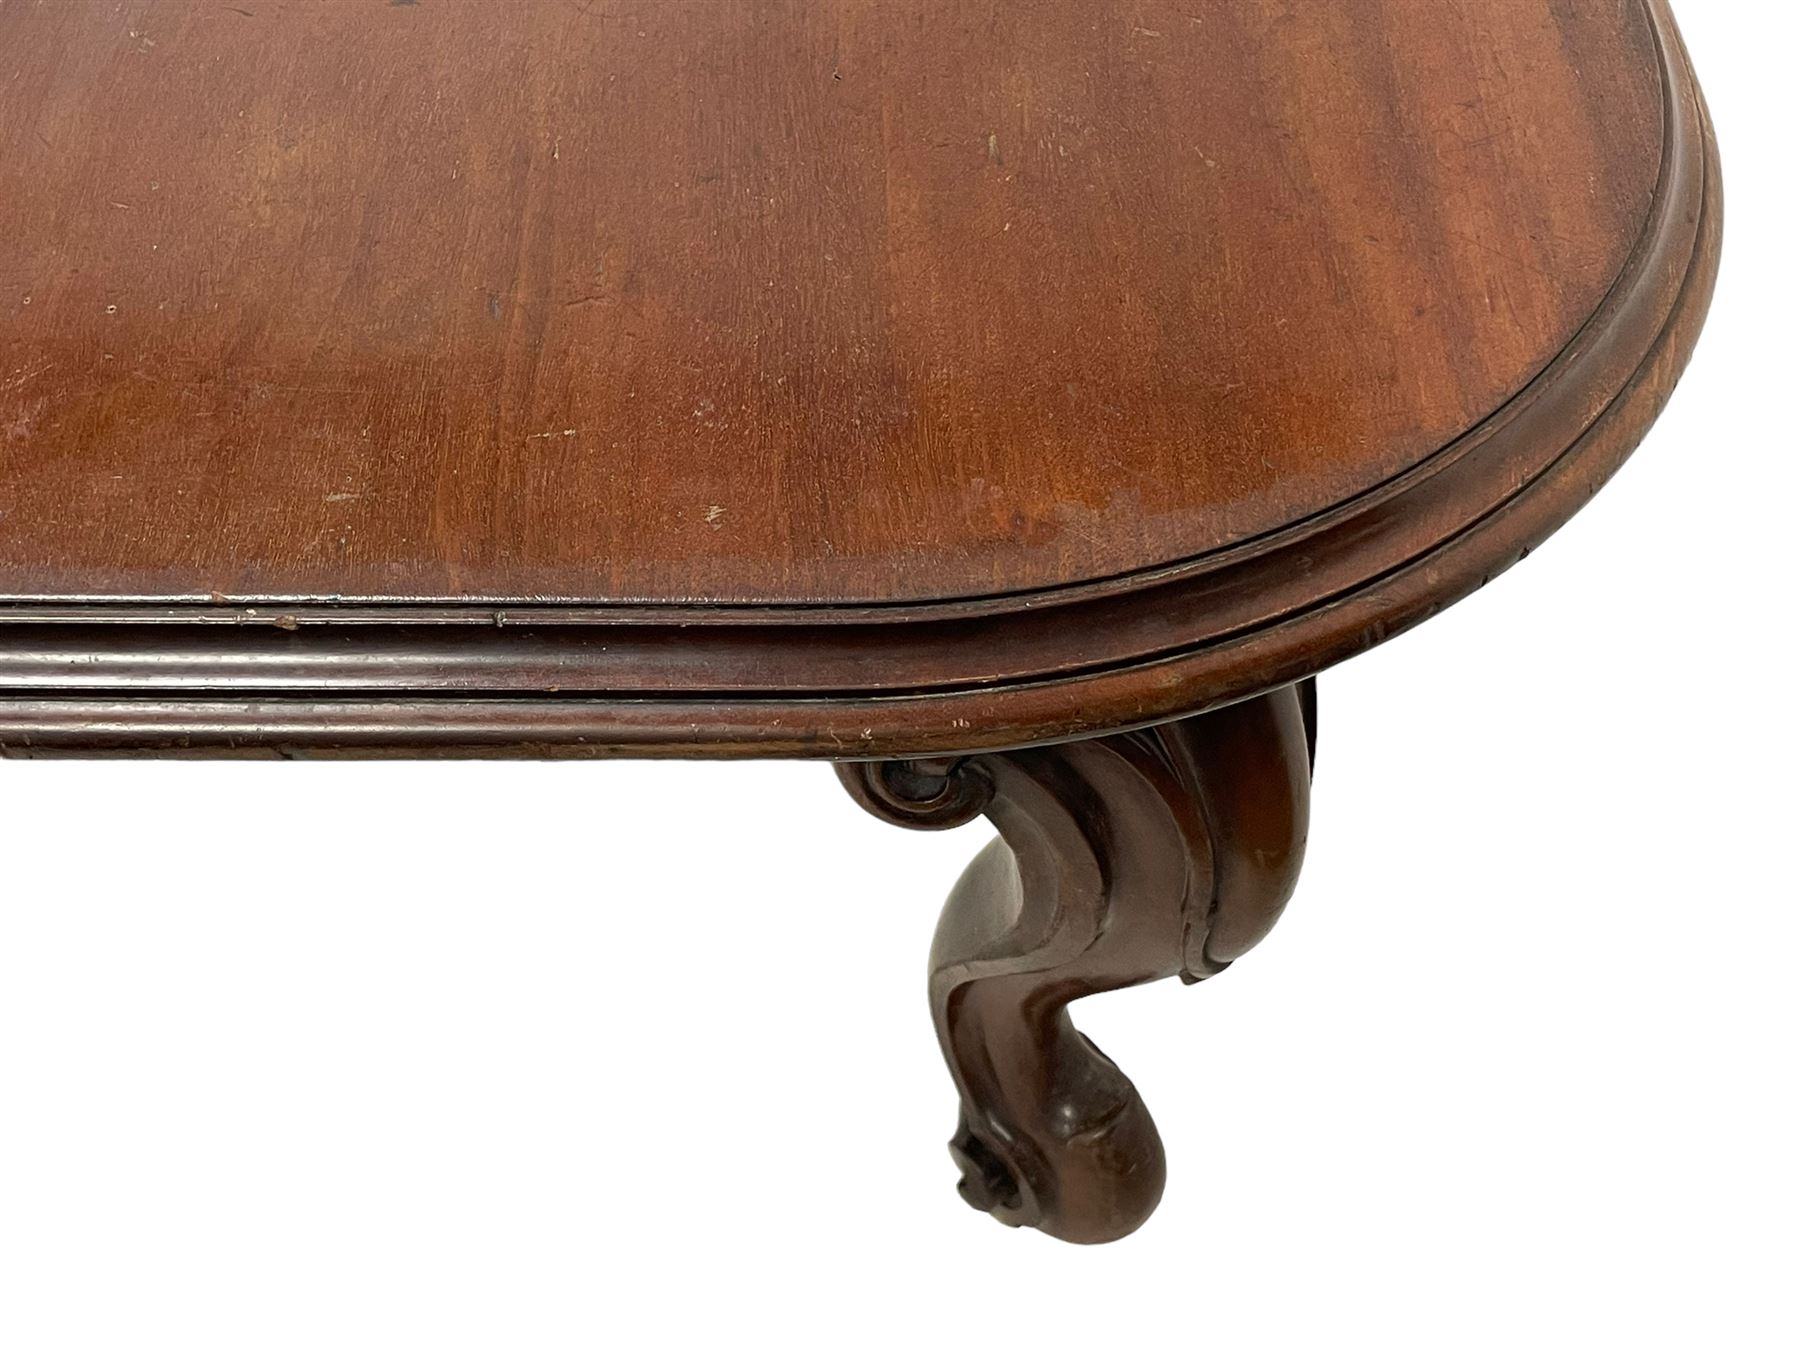 Large 19th century mahogany dining table - Image 20 of 30